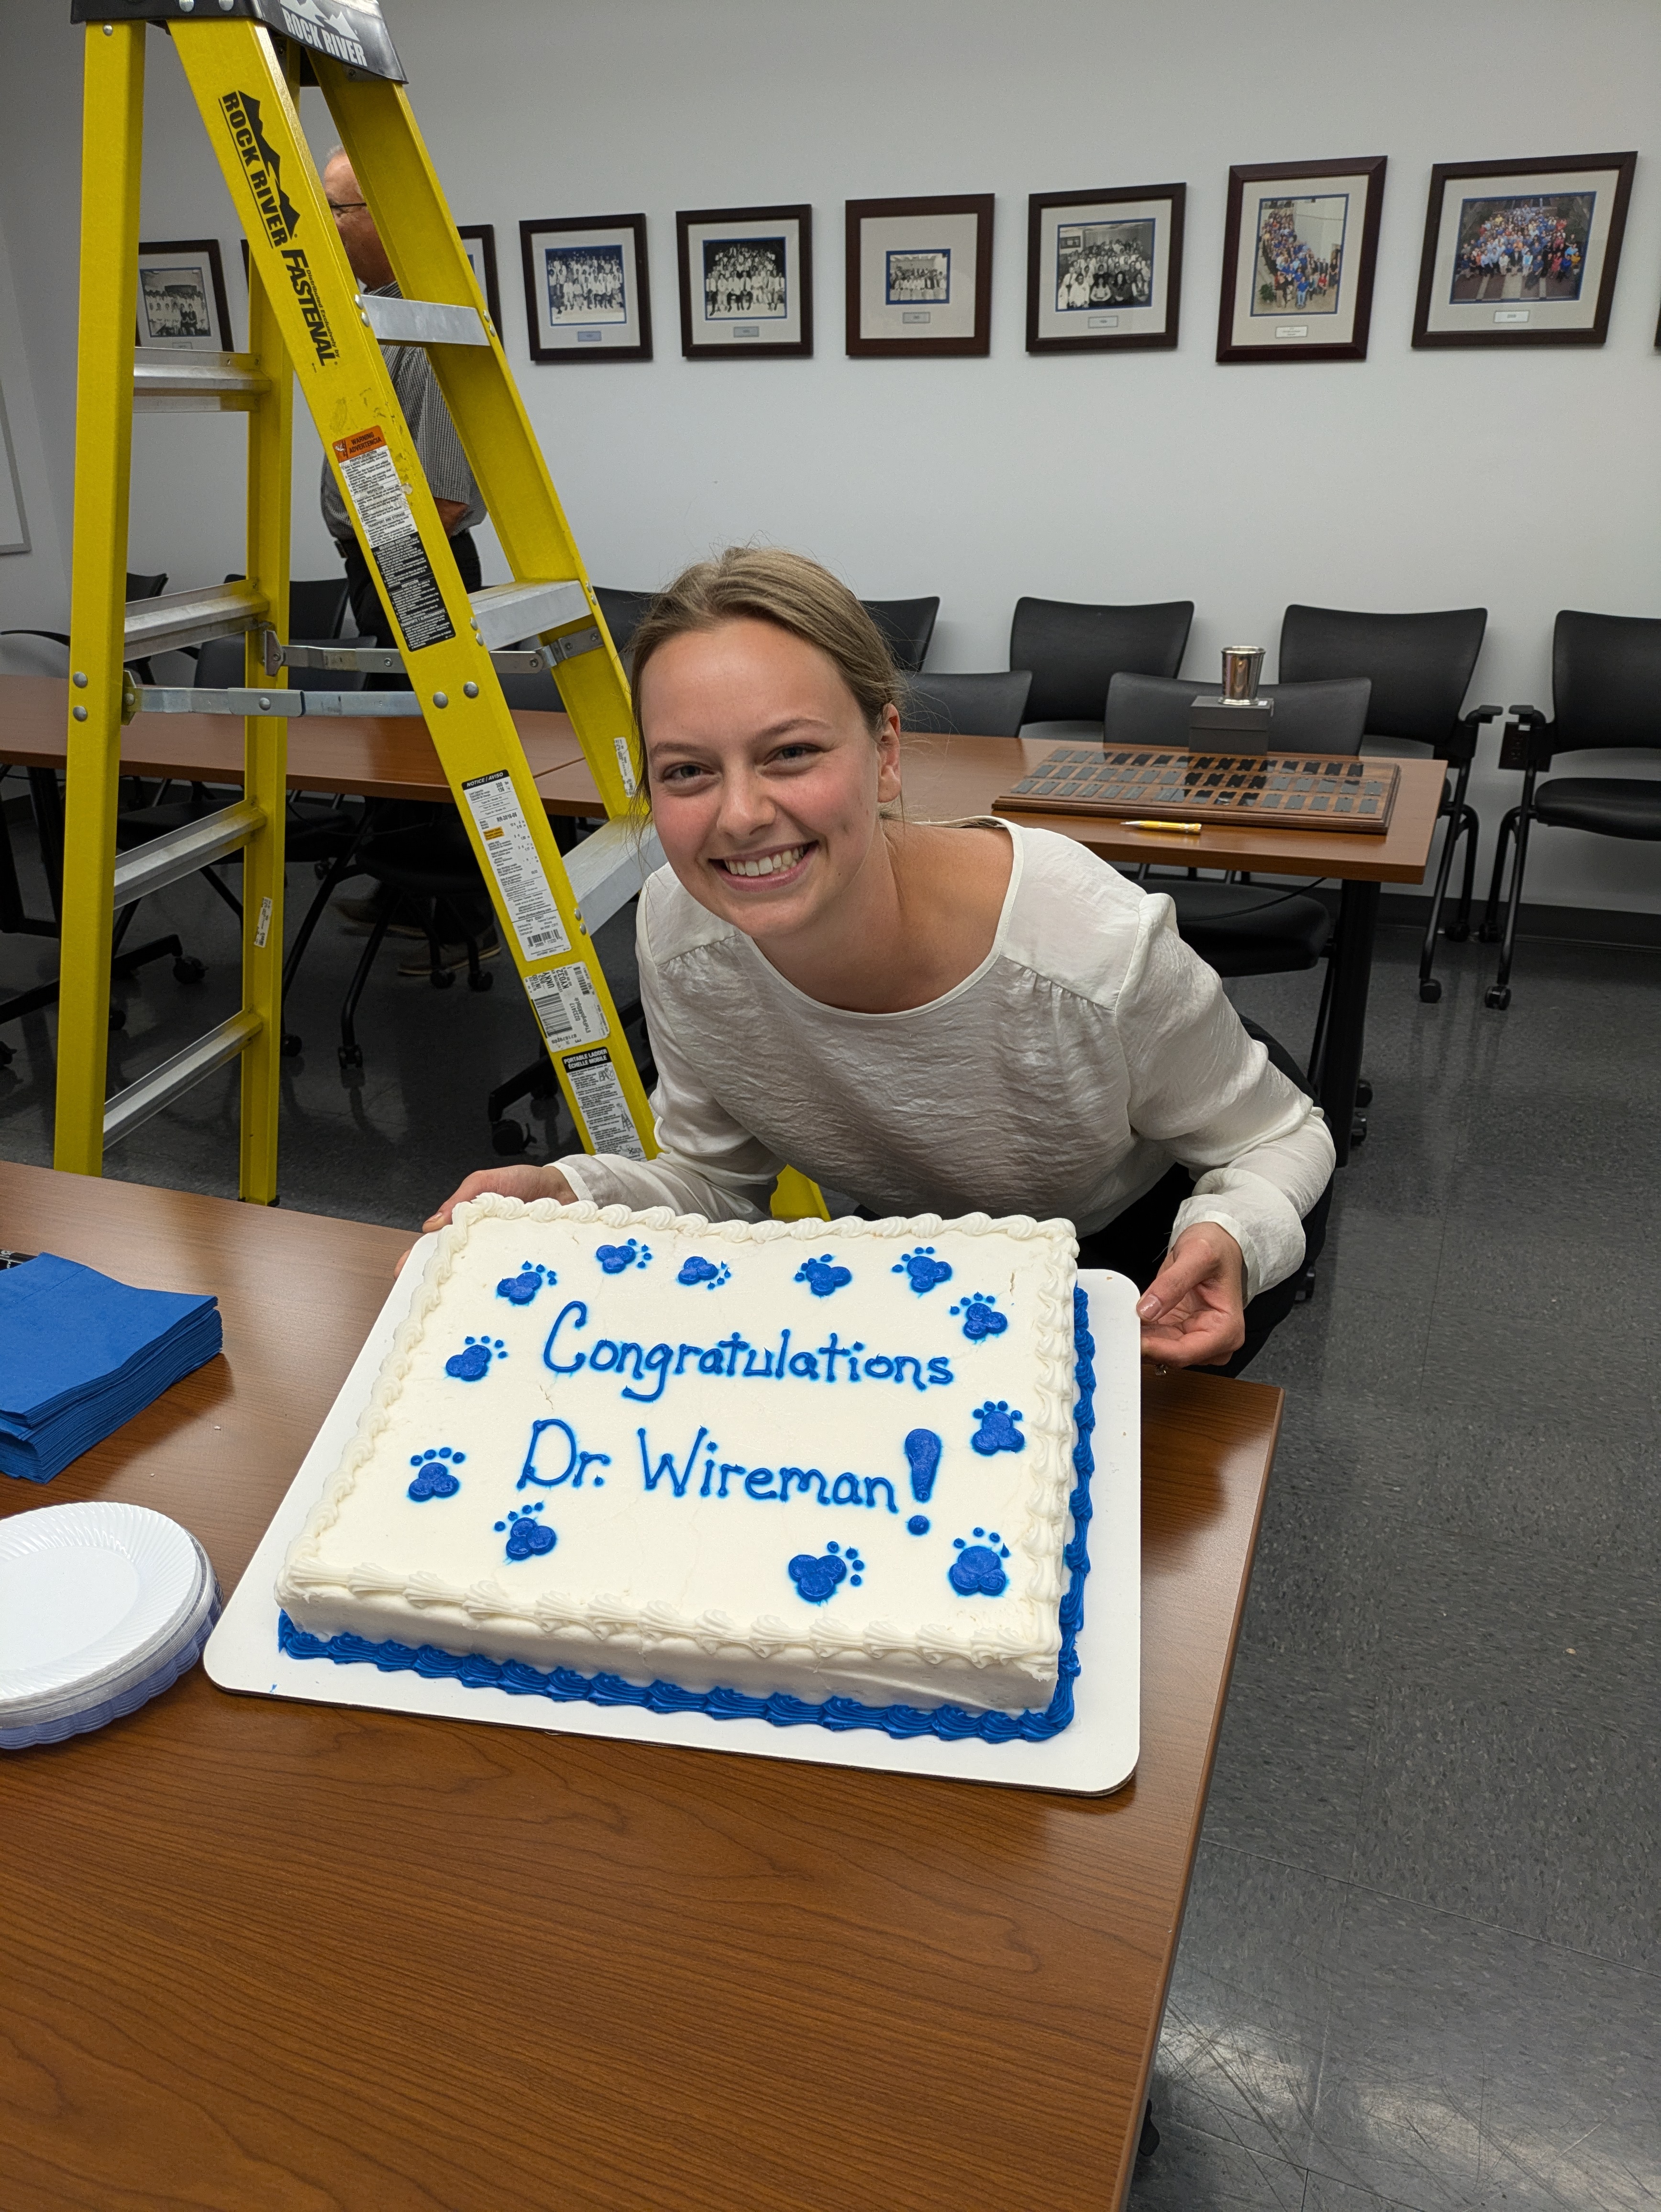 Olivia Wireman holding a cake that says "Congratulations Dr Wireman!"